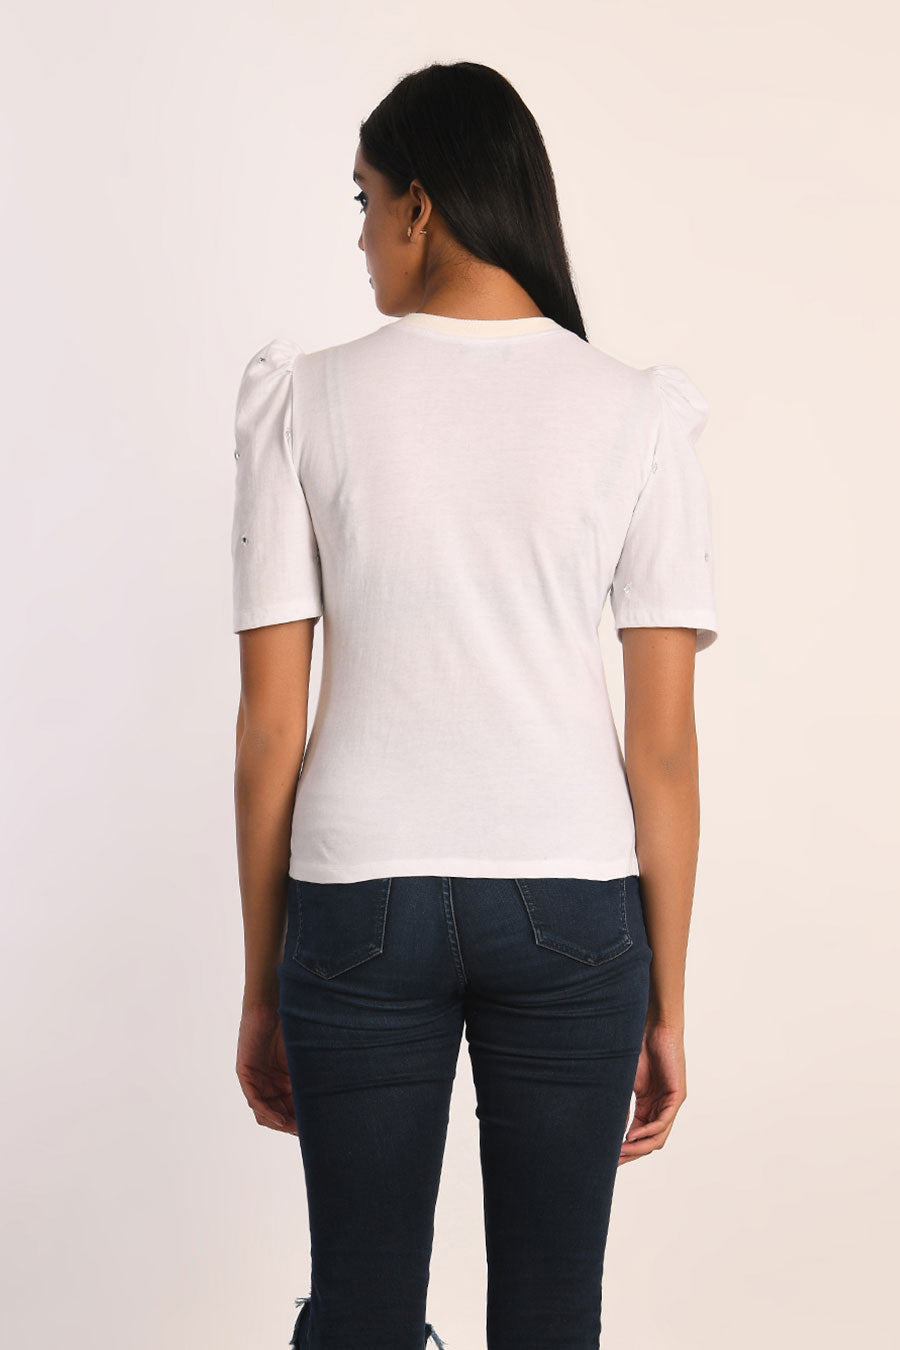 Silver Embellished White Jersey Top